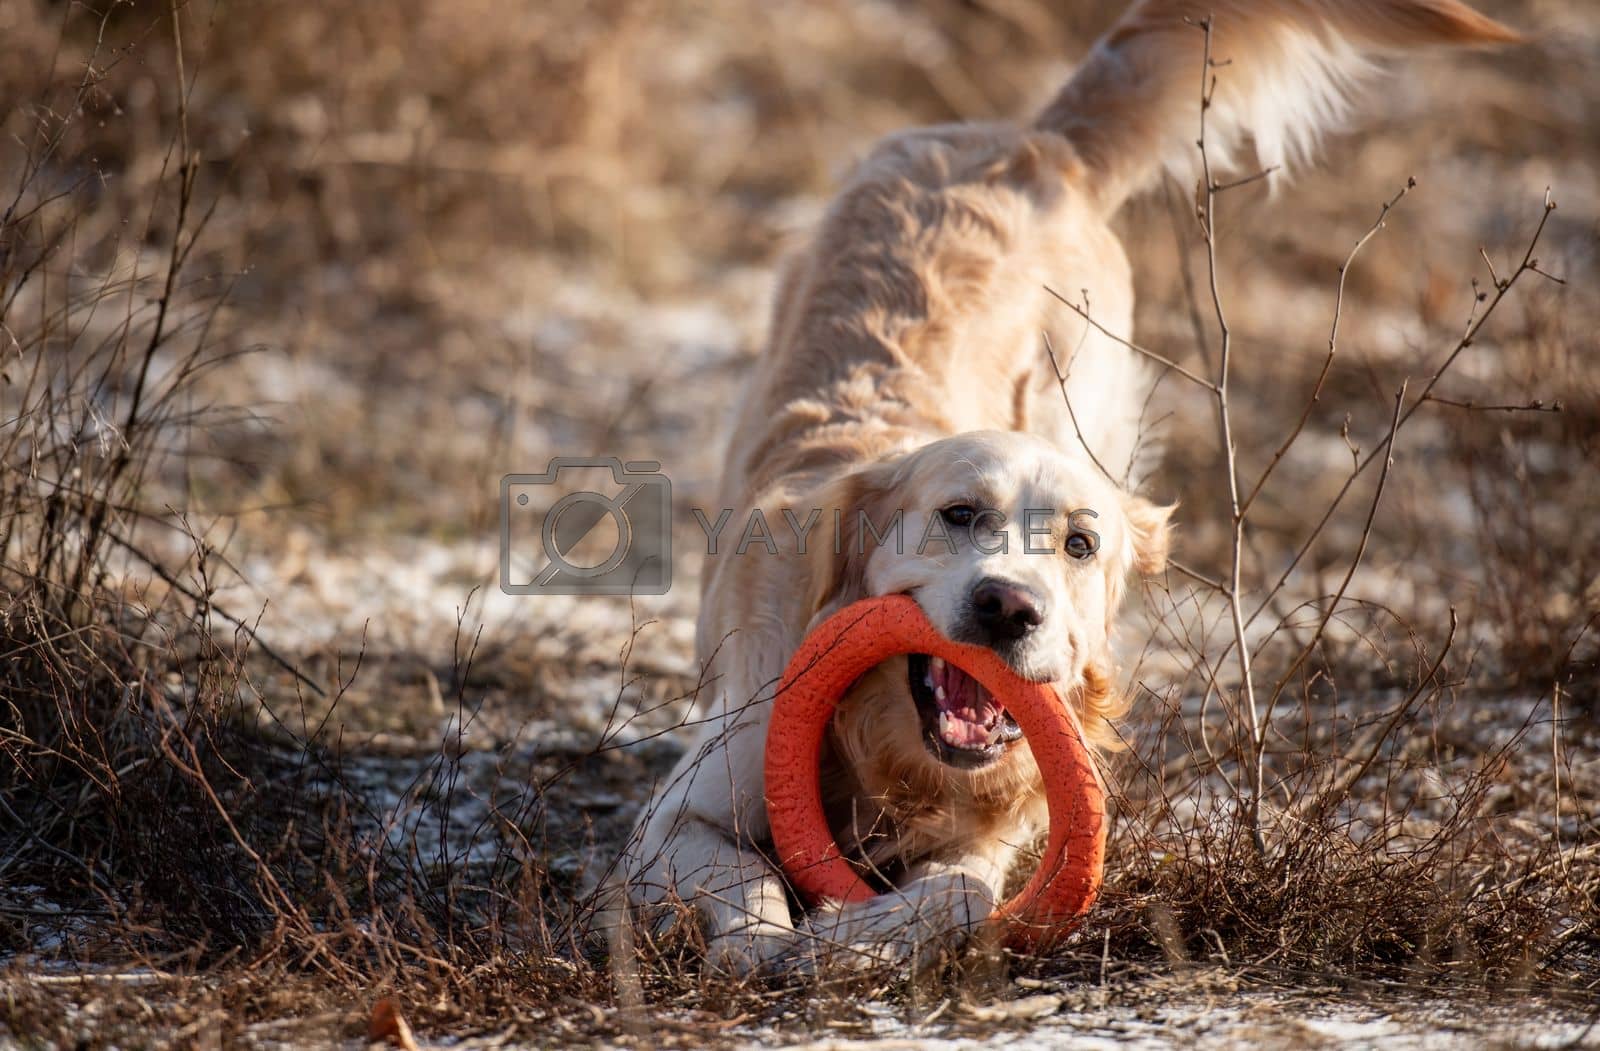 Royalty free image of Golden retriever dog outdoors by GekaSkr